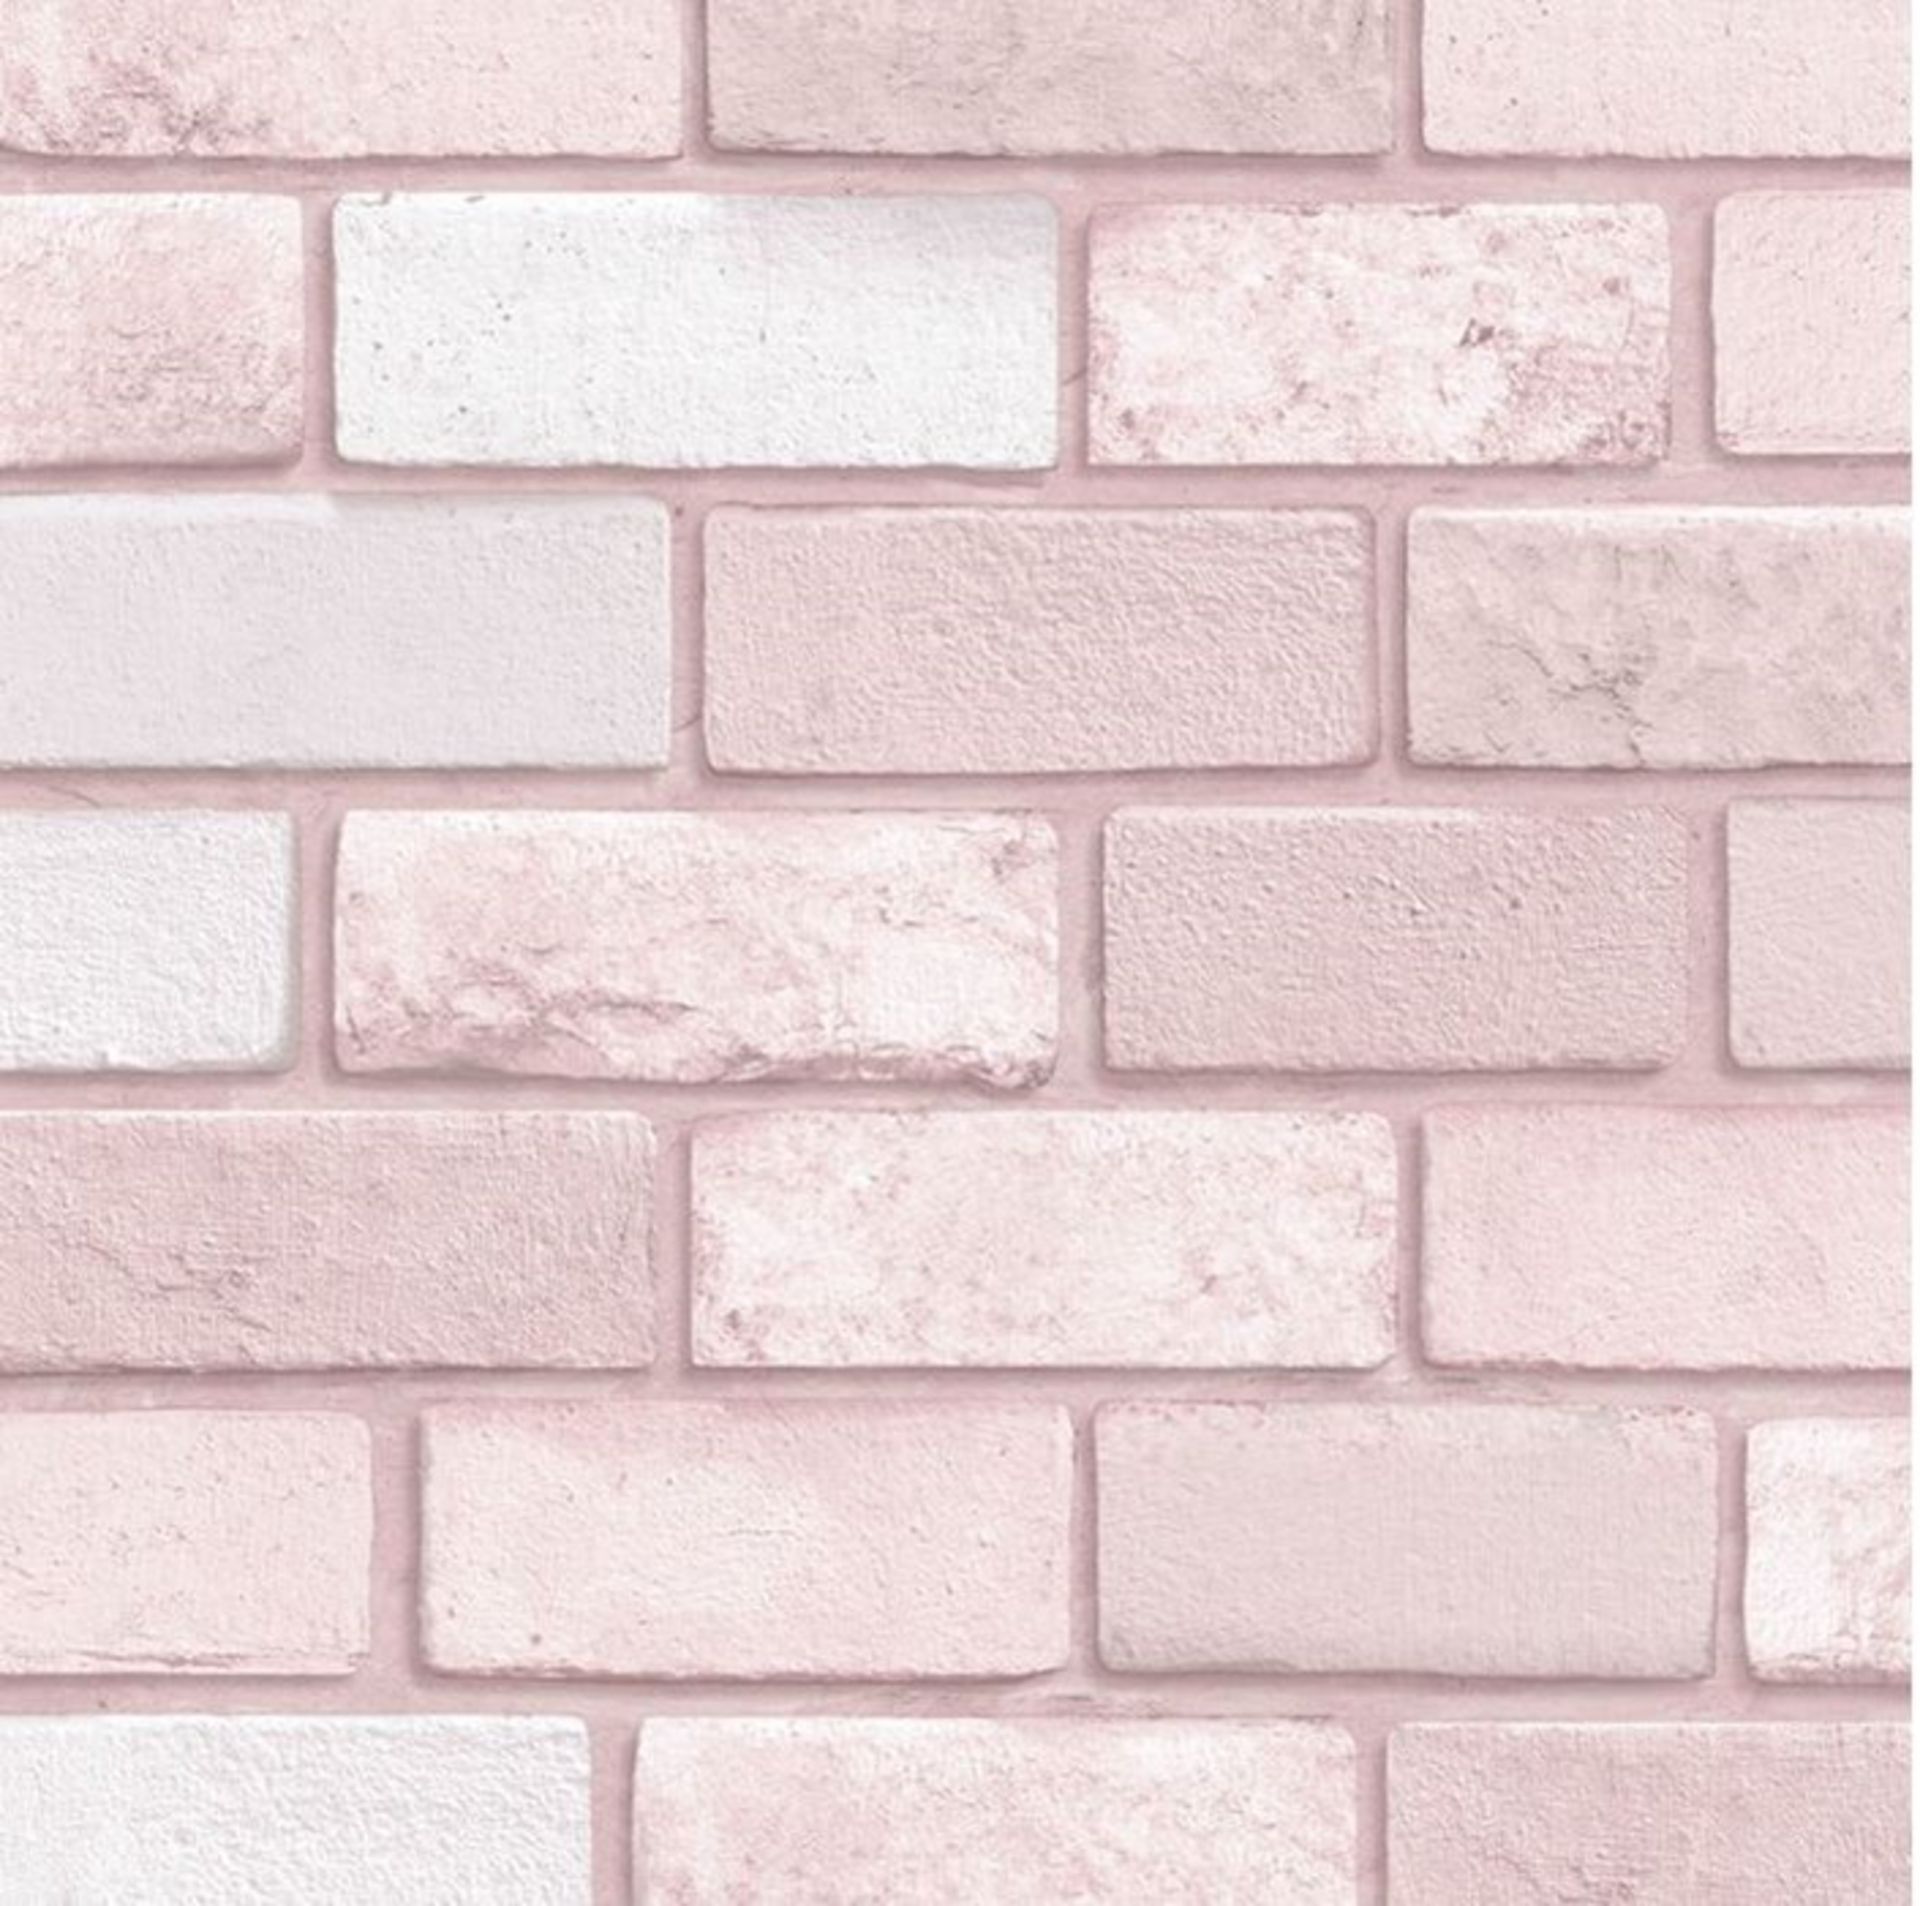 1 AS NEW ROLL OF ARTHOUSE DIAMOND BRICK GLITTER WALLPAPER IN PINK - 260005